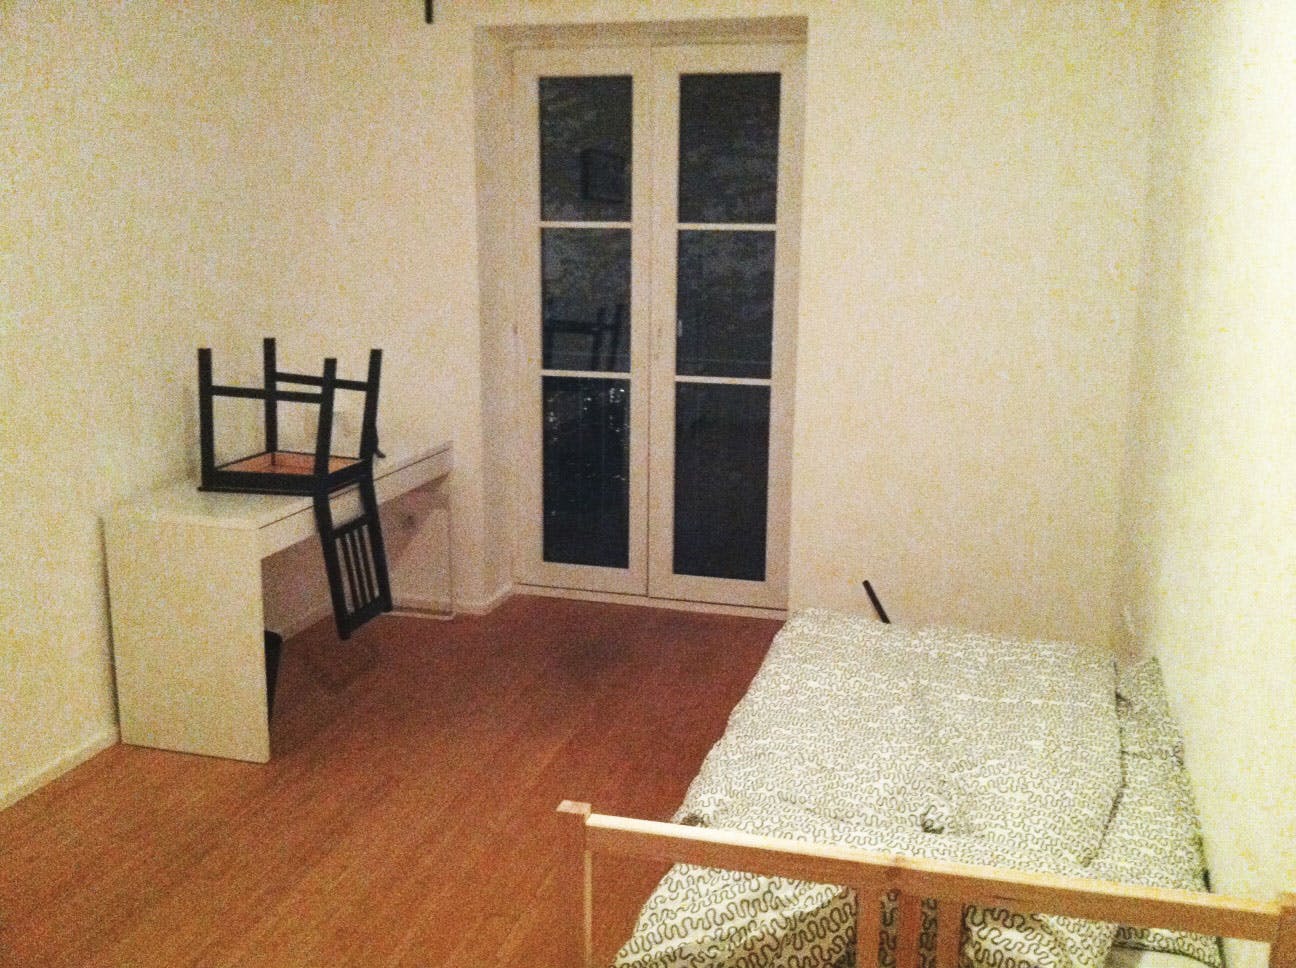 Image of the room